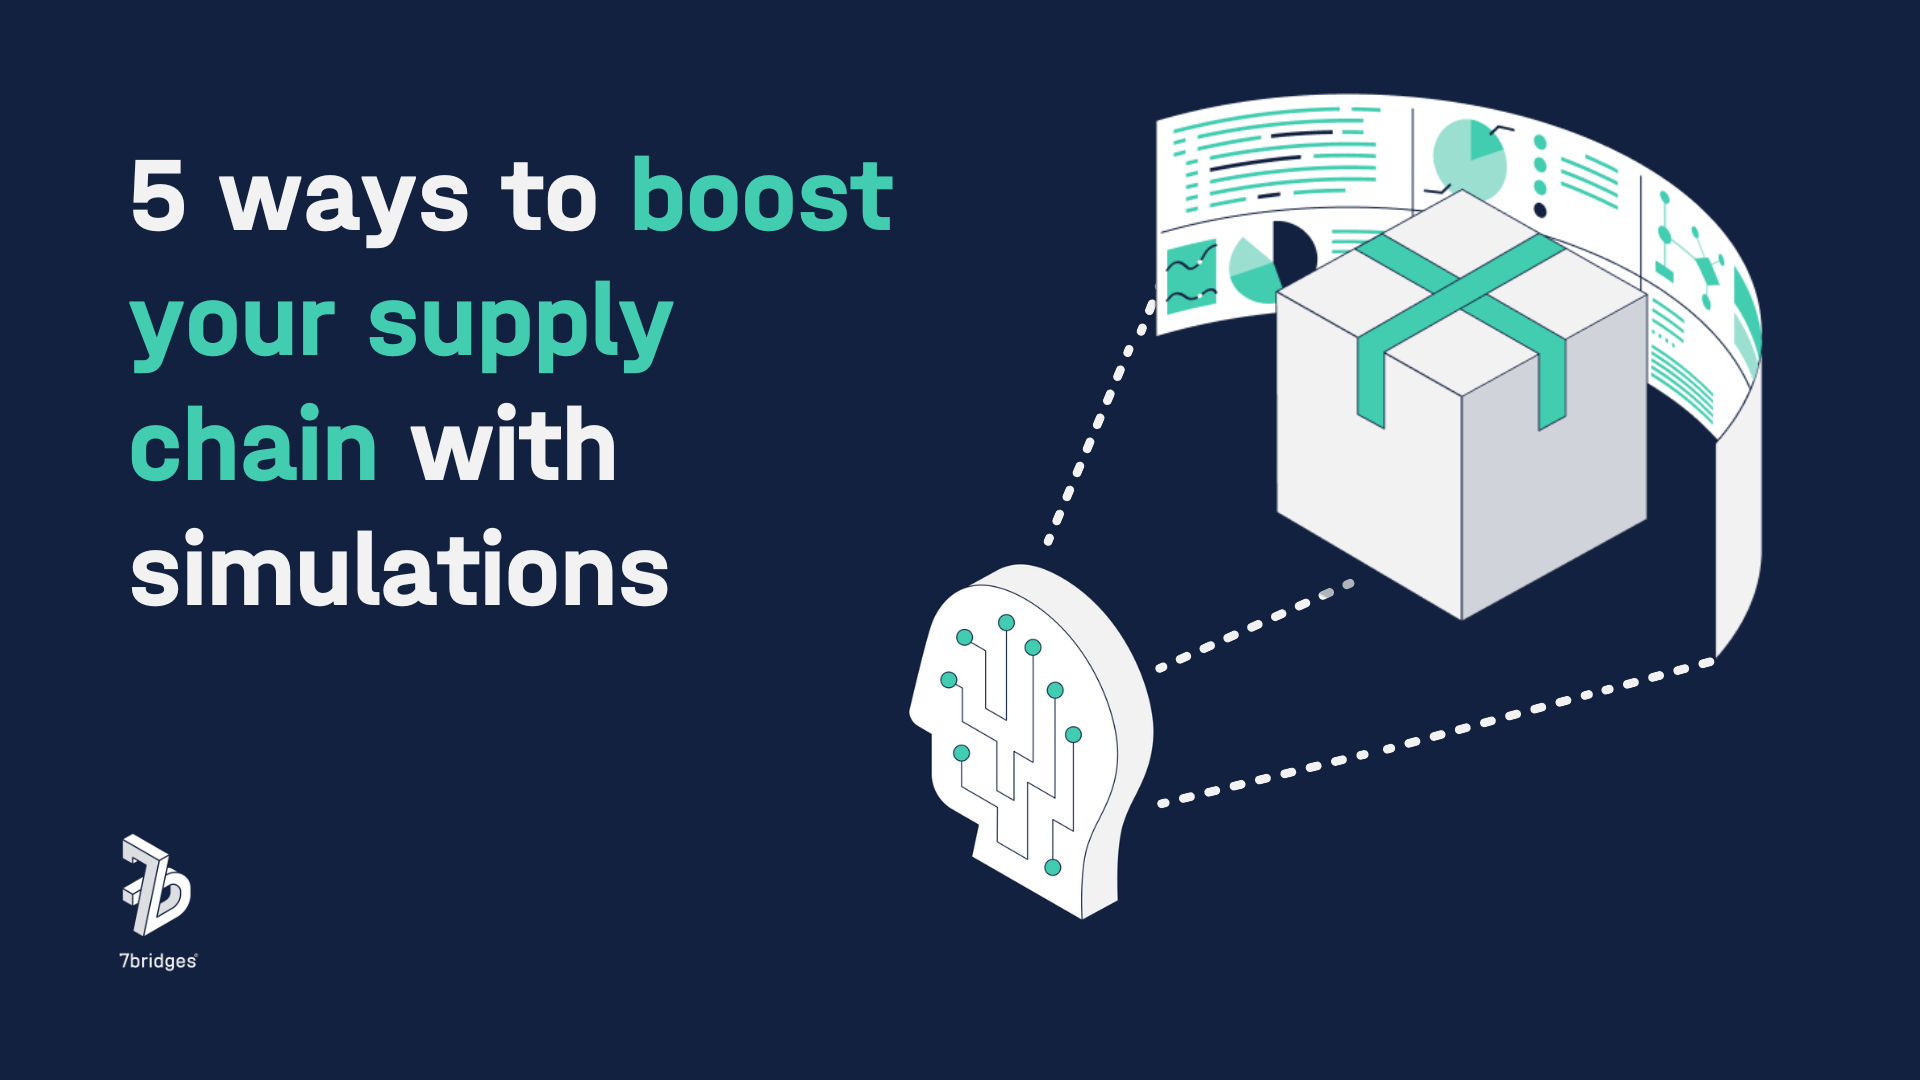 5 ways to boost your supply chain with simulations on blue text with illustration techy AI head, a box and screens to the right